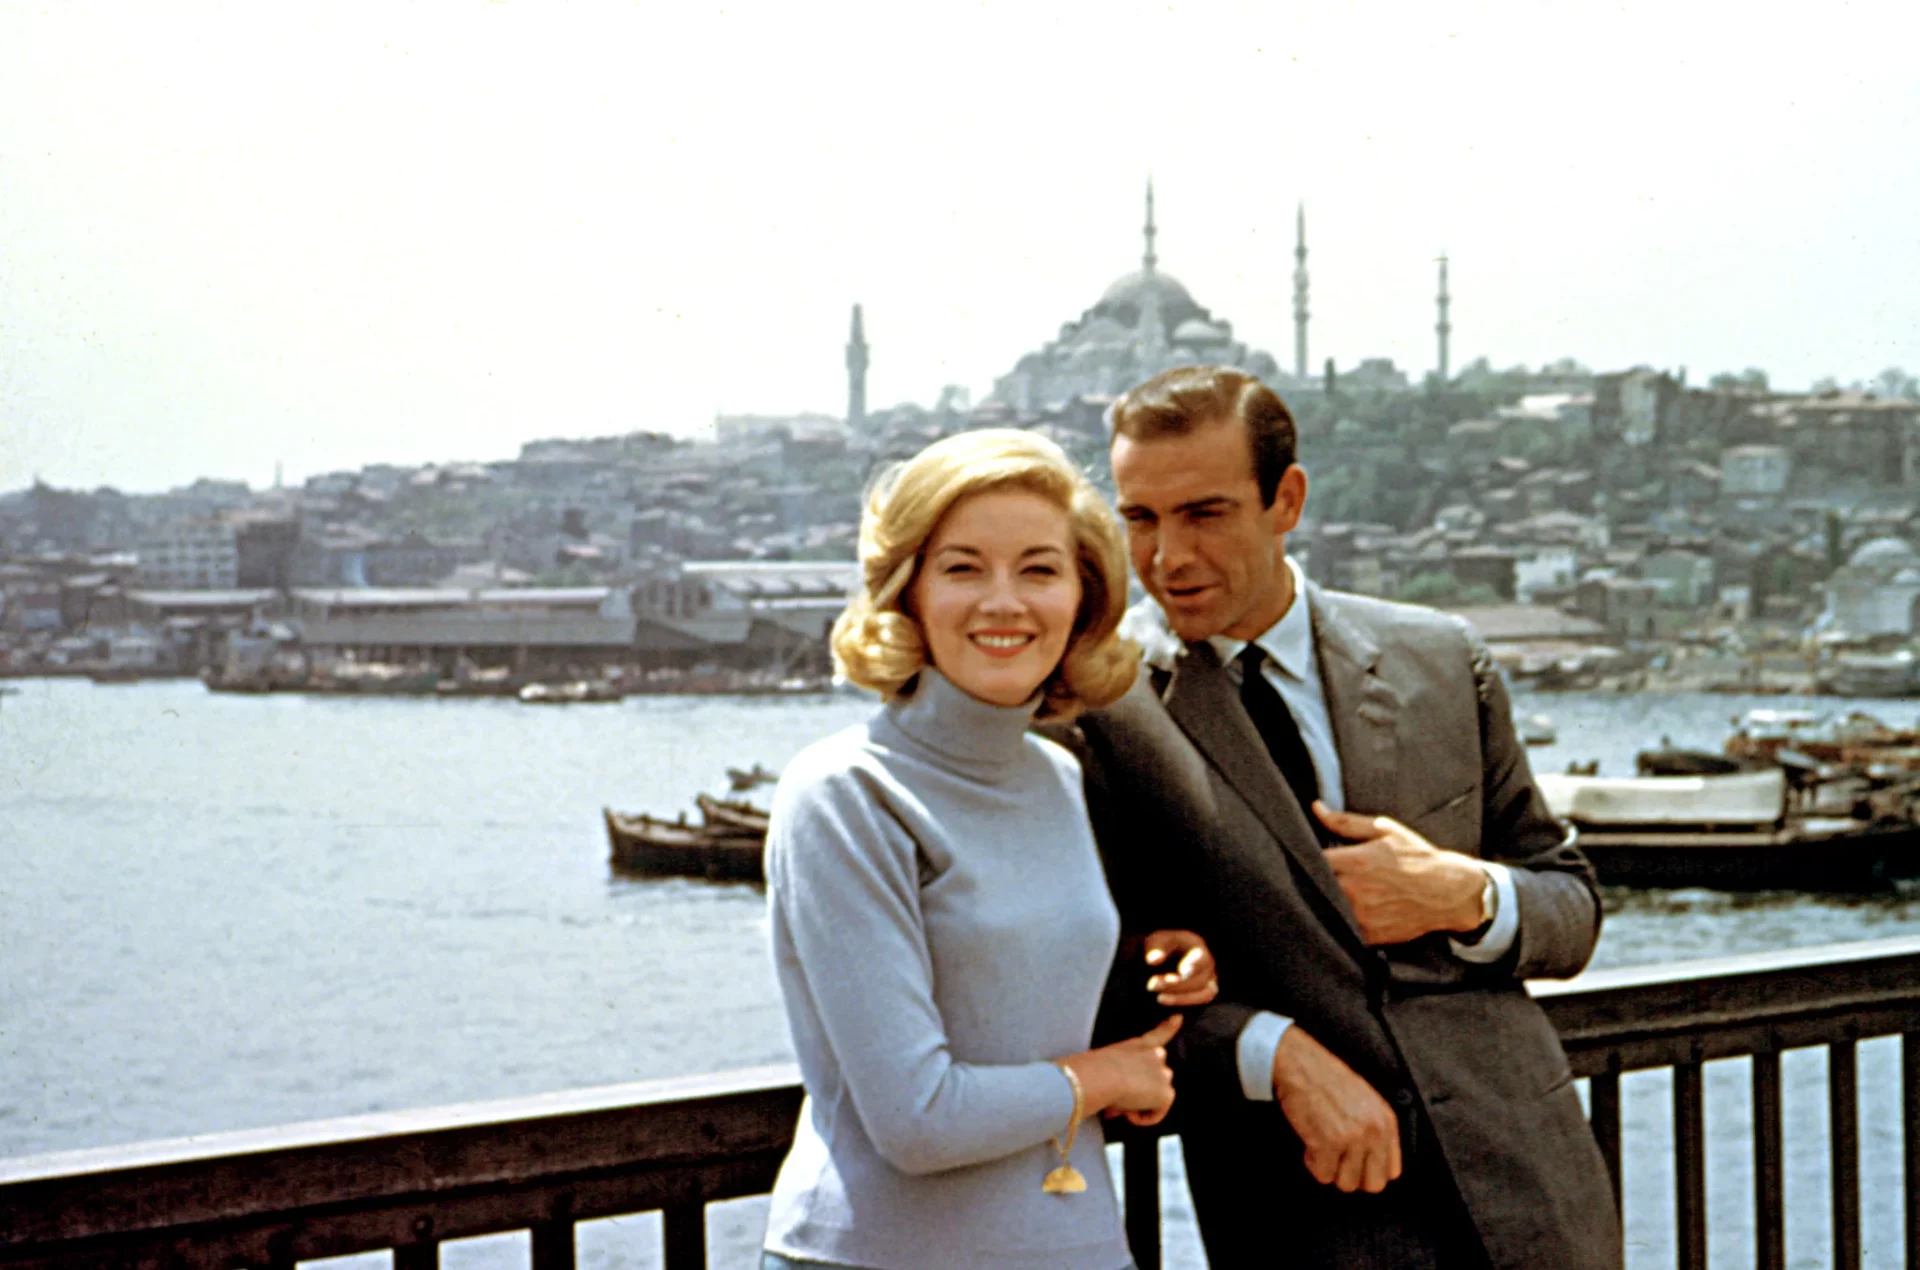 Best James Bond Movies: From Russia With Love (1963)